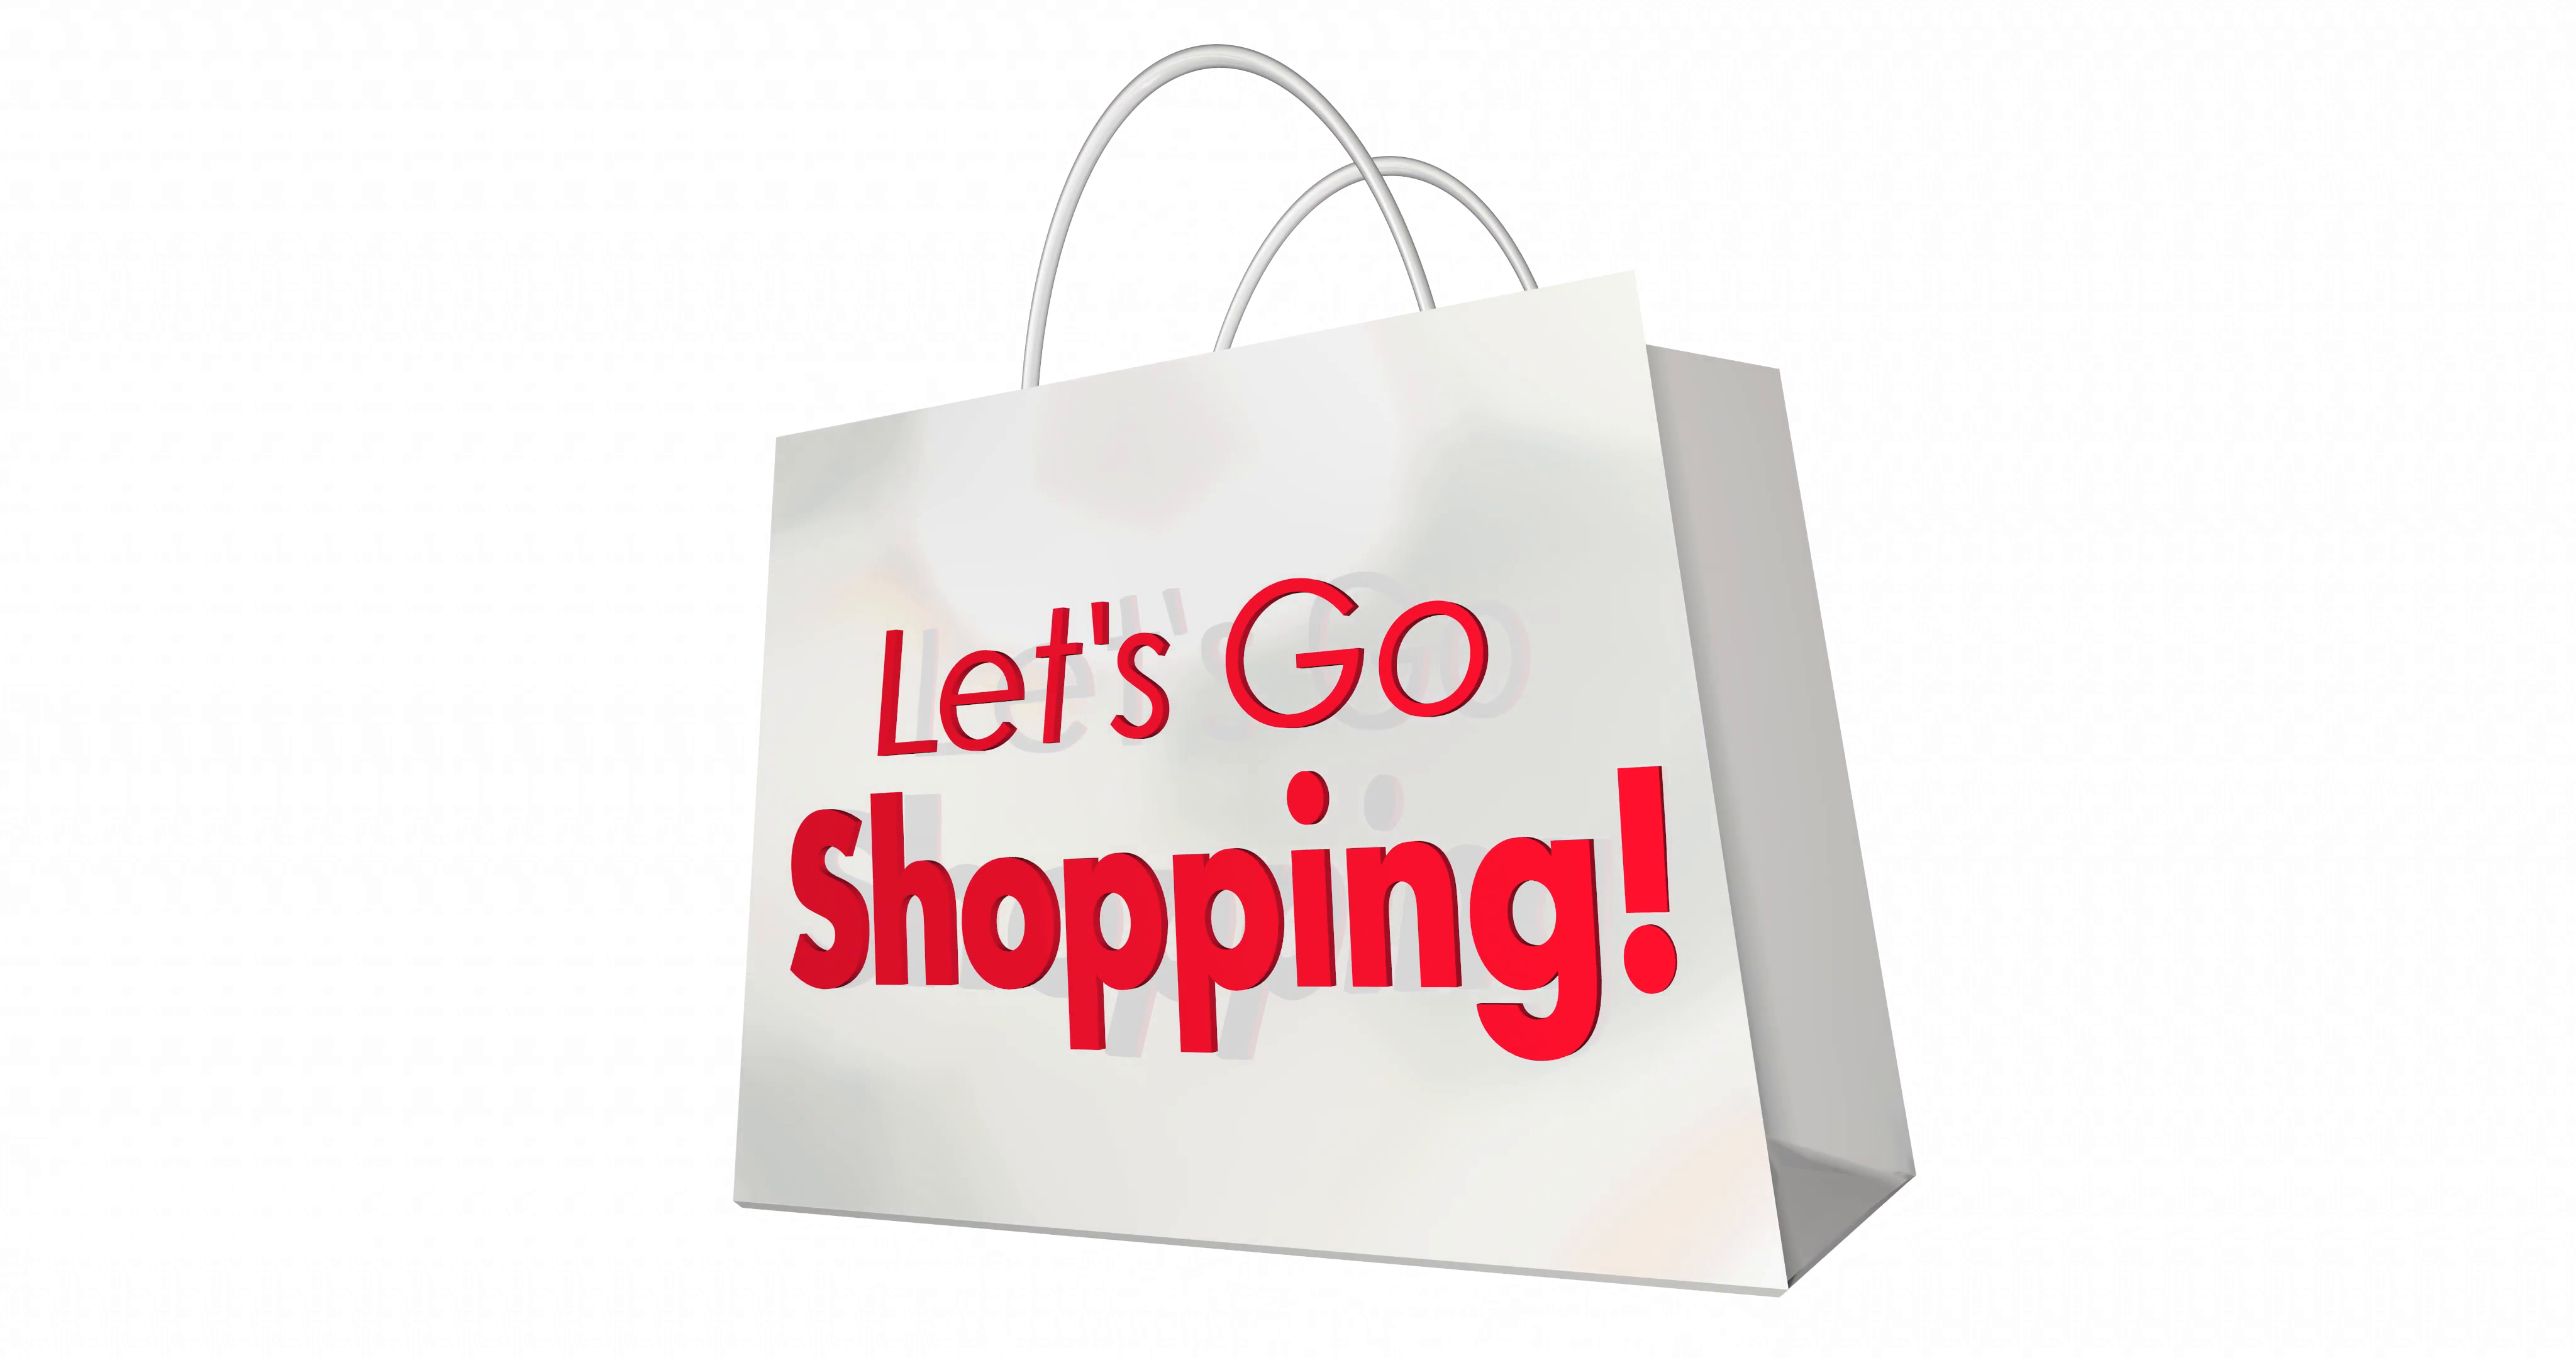 We go shopping now. Lets go shopping. Шоппинг. Go shopping картинка. Let's go shopping 5 класс.